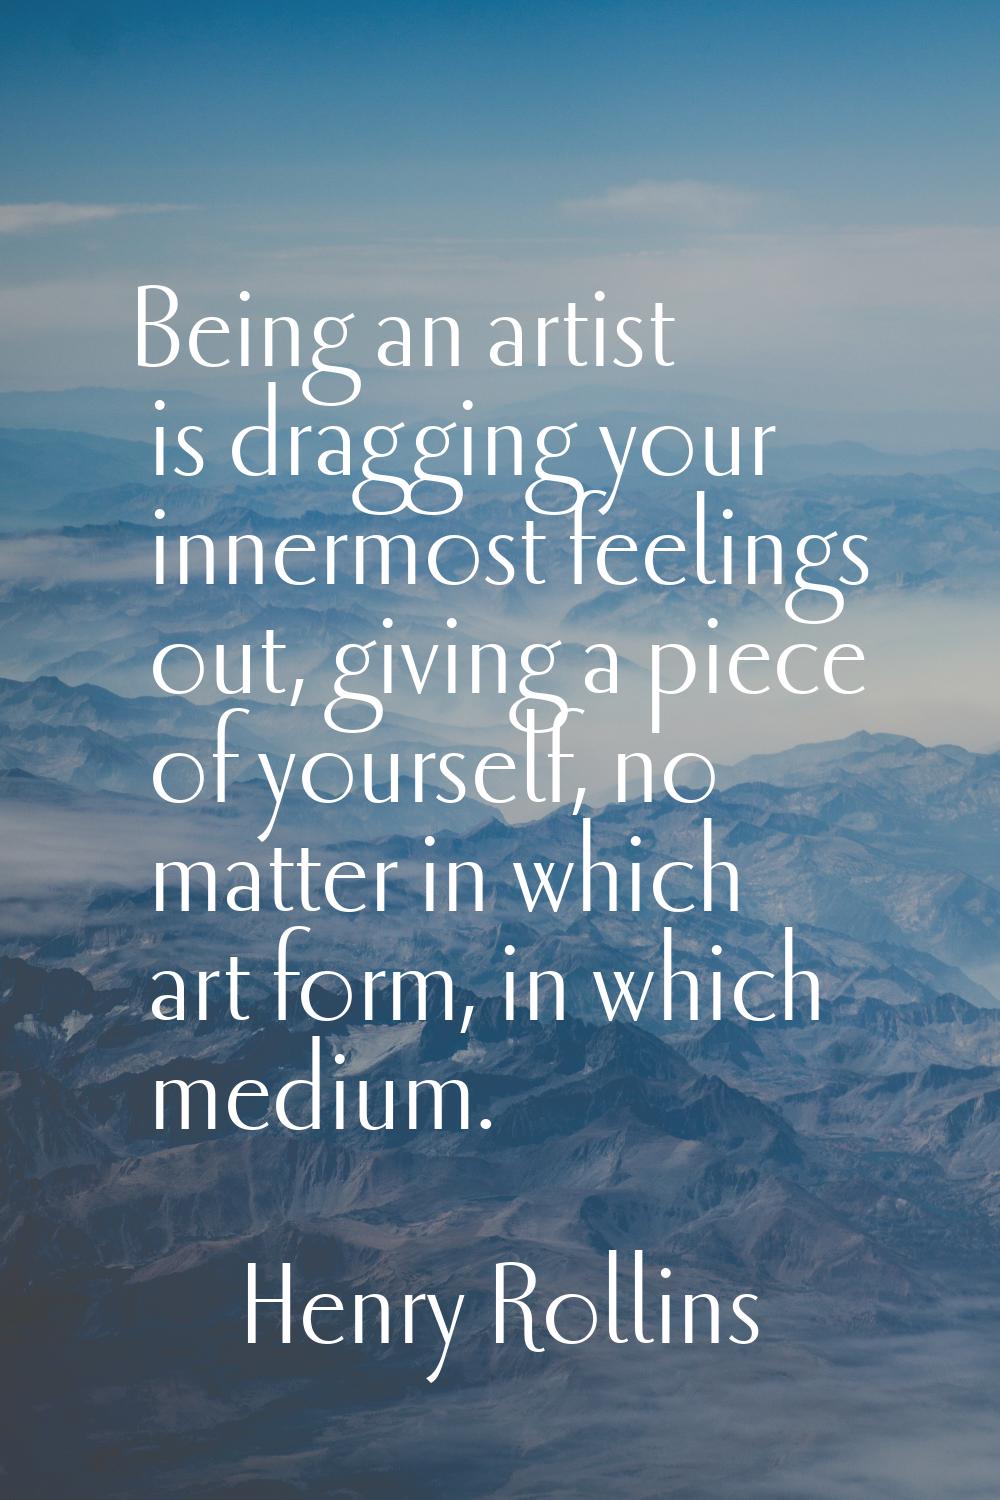 Being an artist is dragging your innermost feelings out, giving a piece of yourself, no matter in w